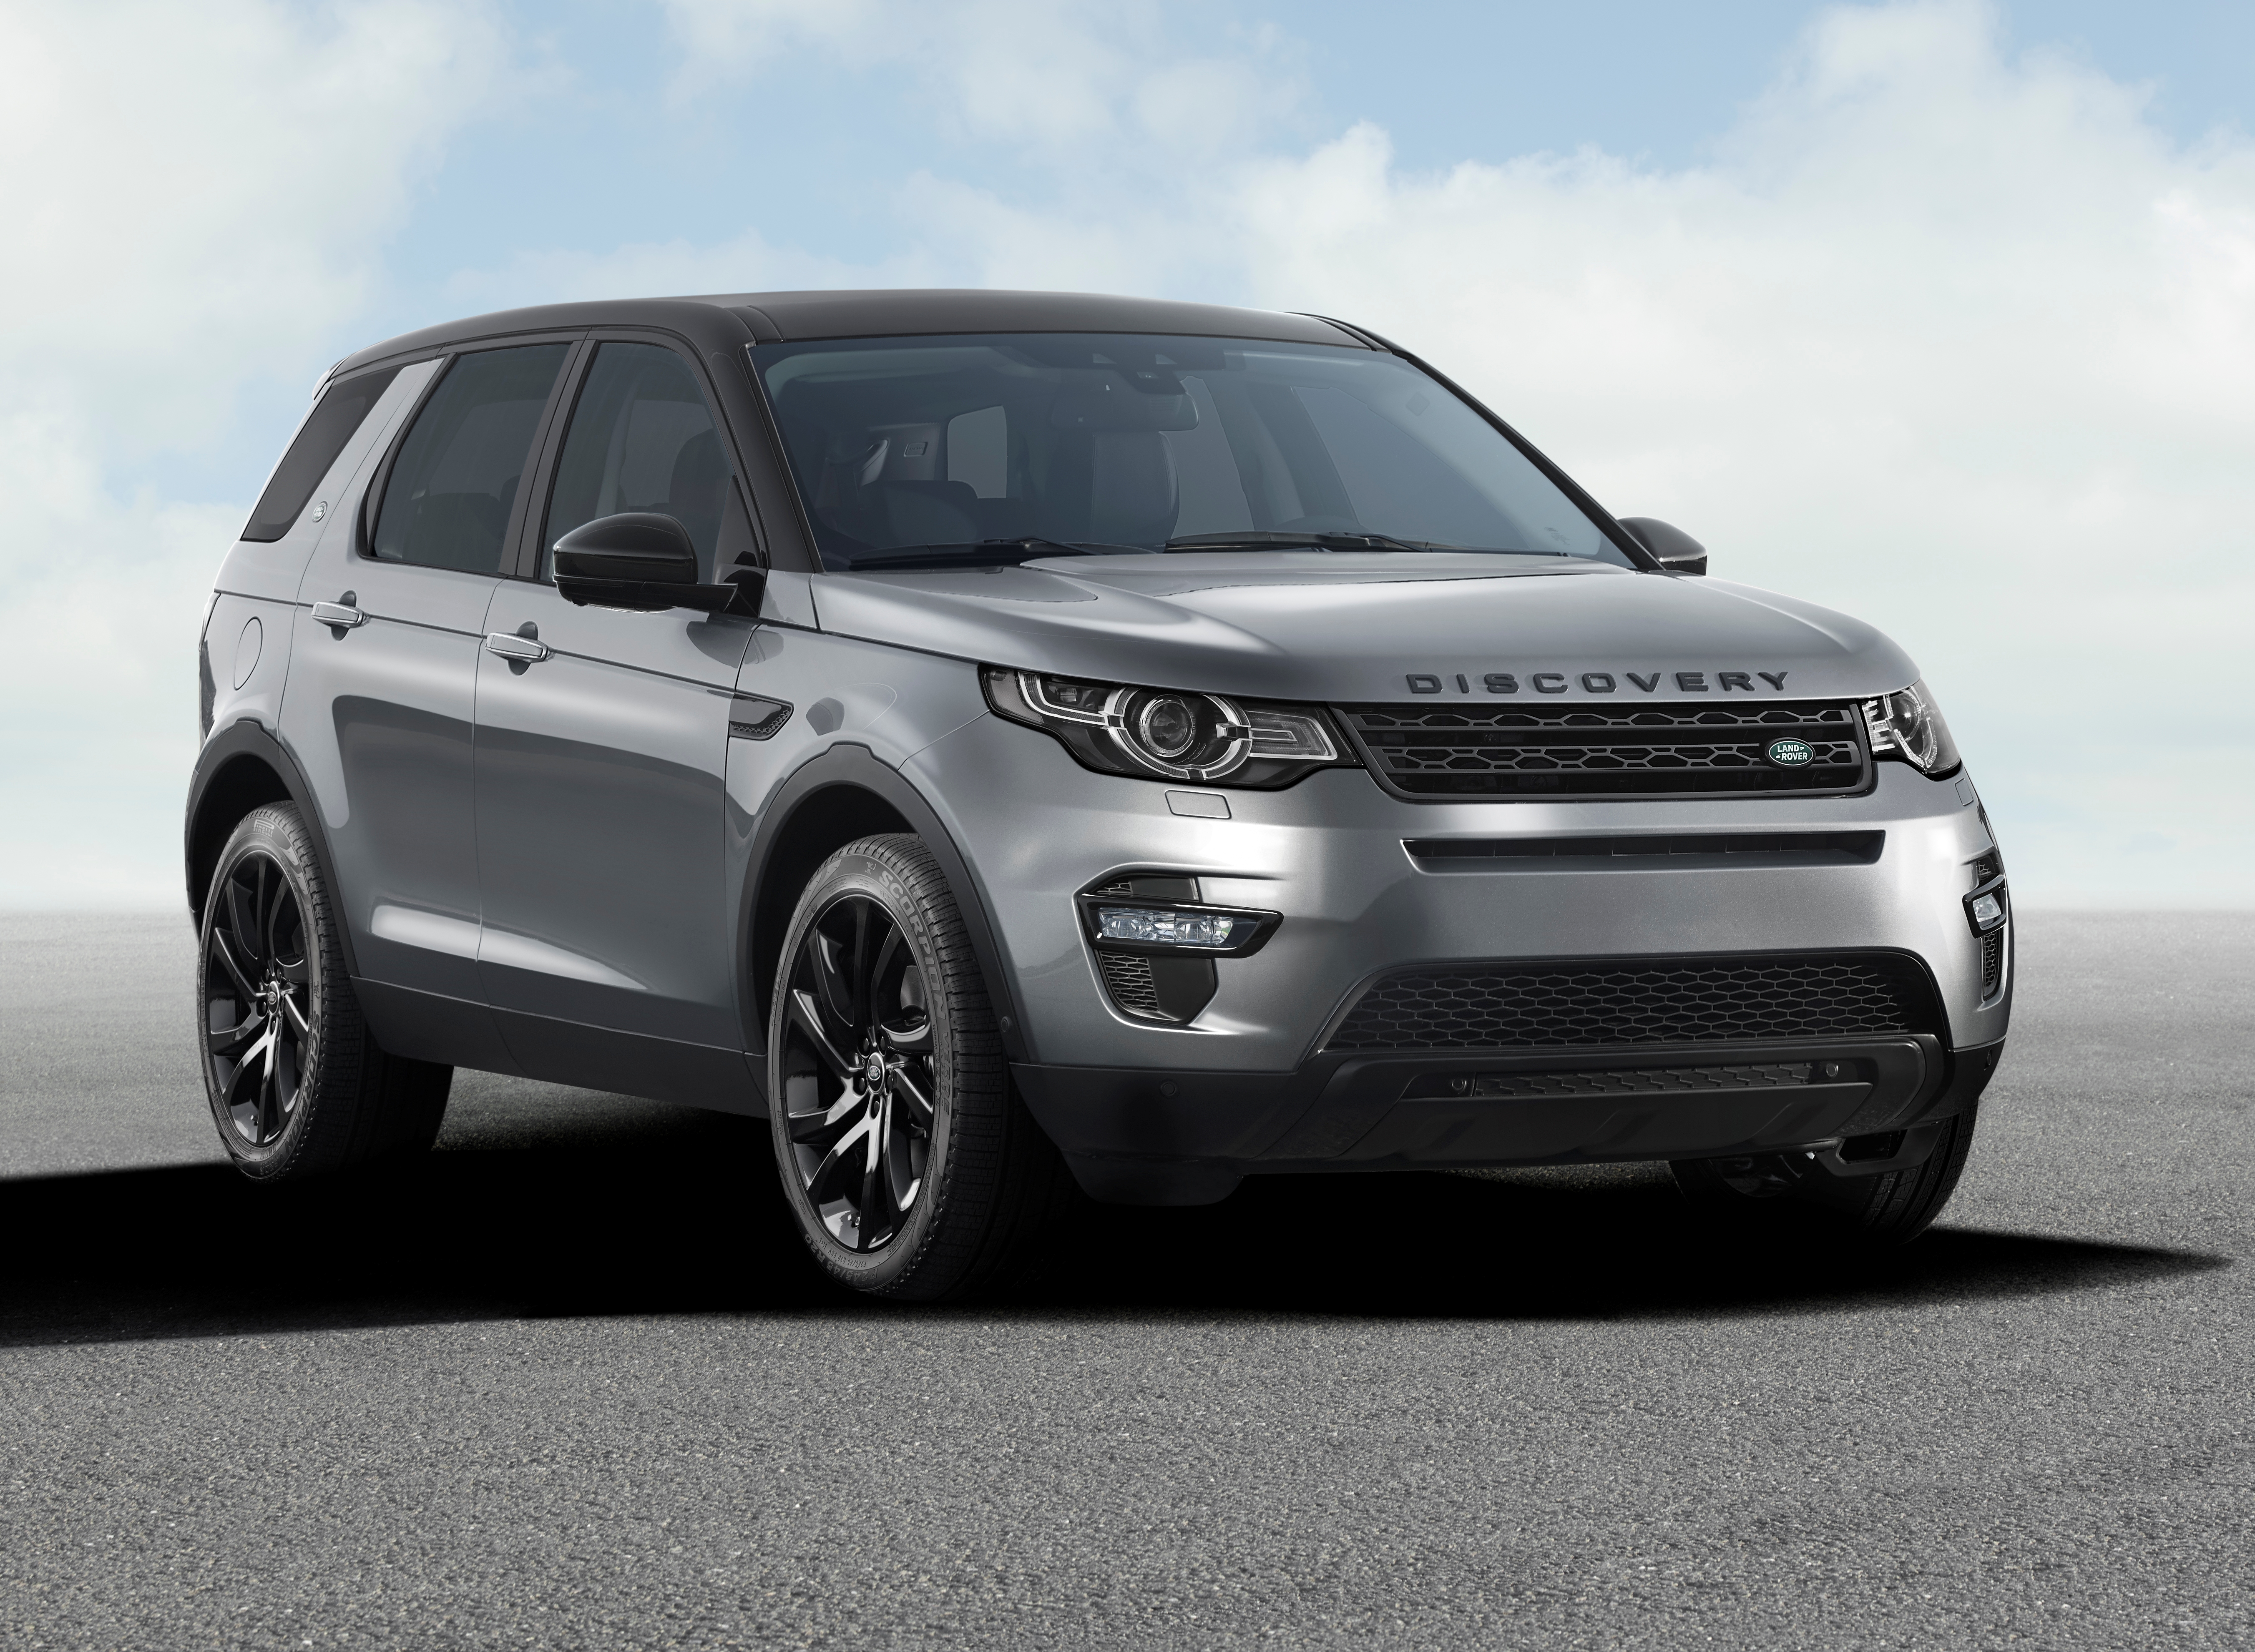 Land Rover Discovery Backgrounds, Compatible - PC, Mobile, Gadgets| 5407x3962 px